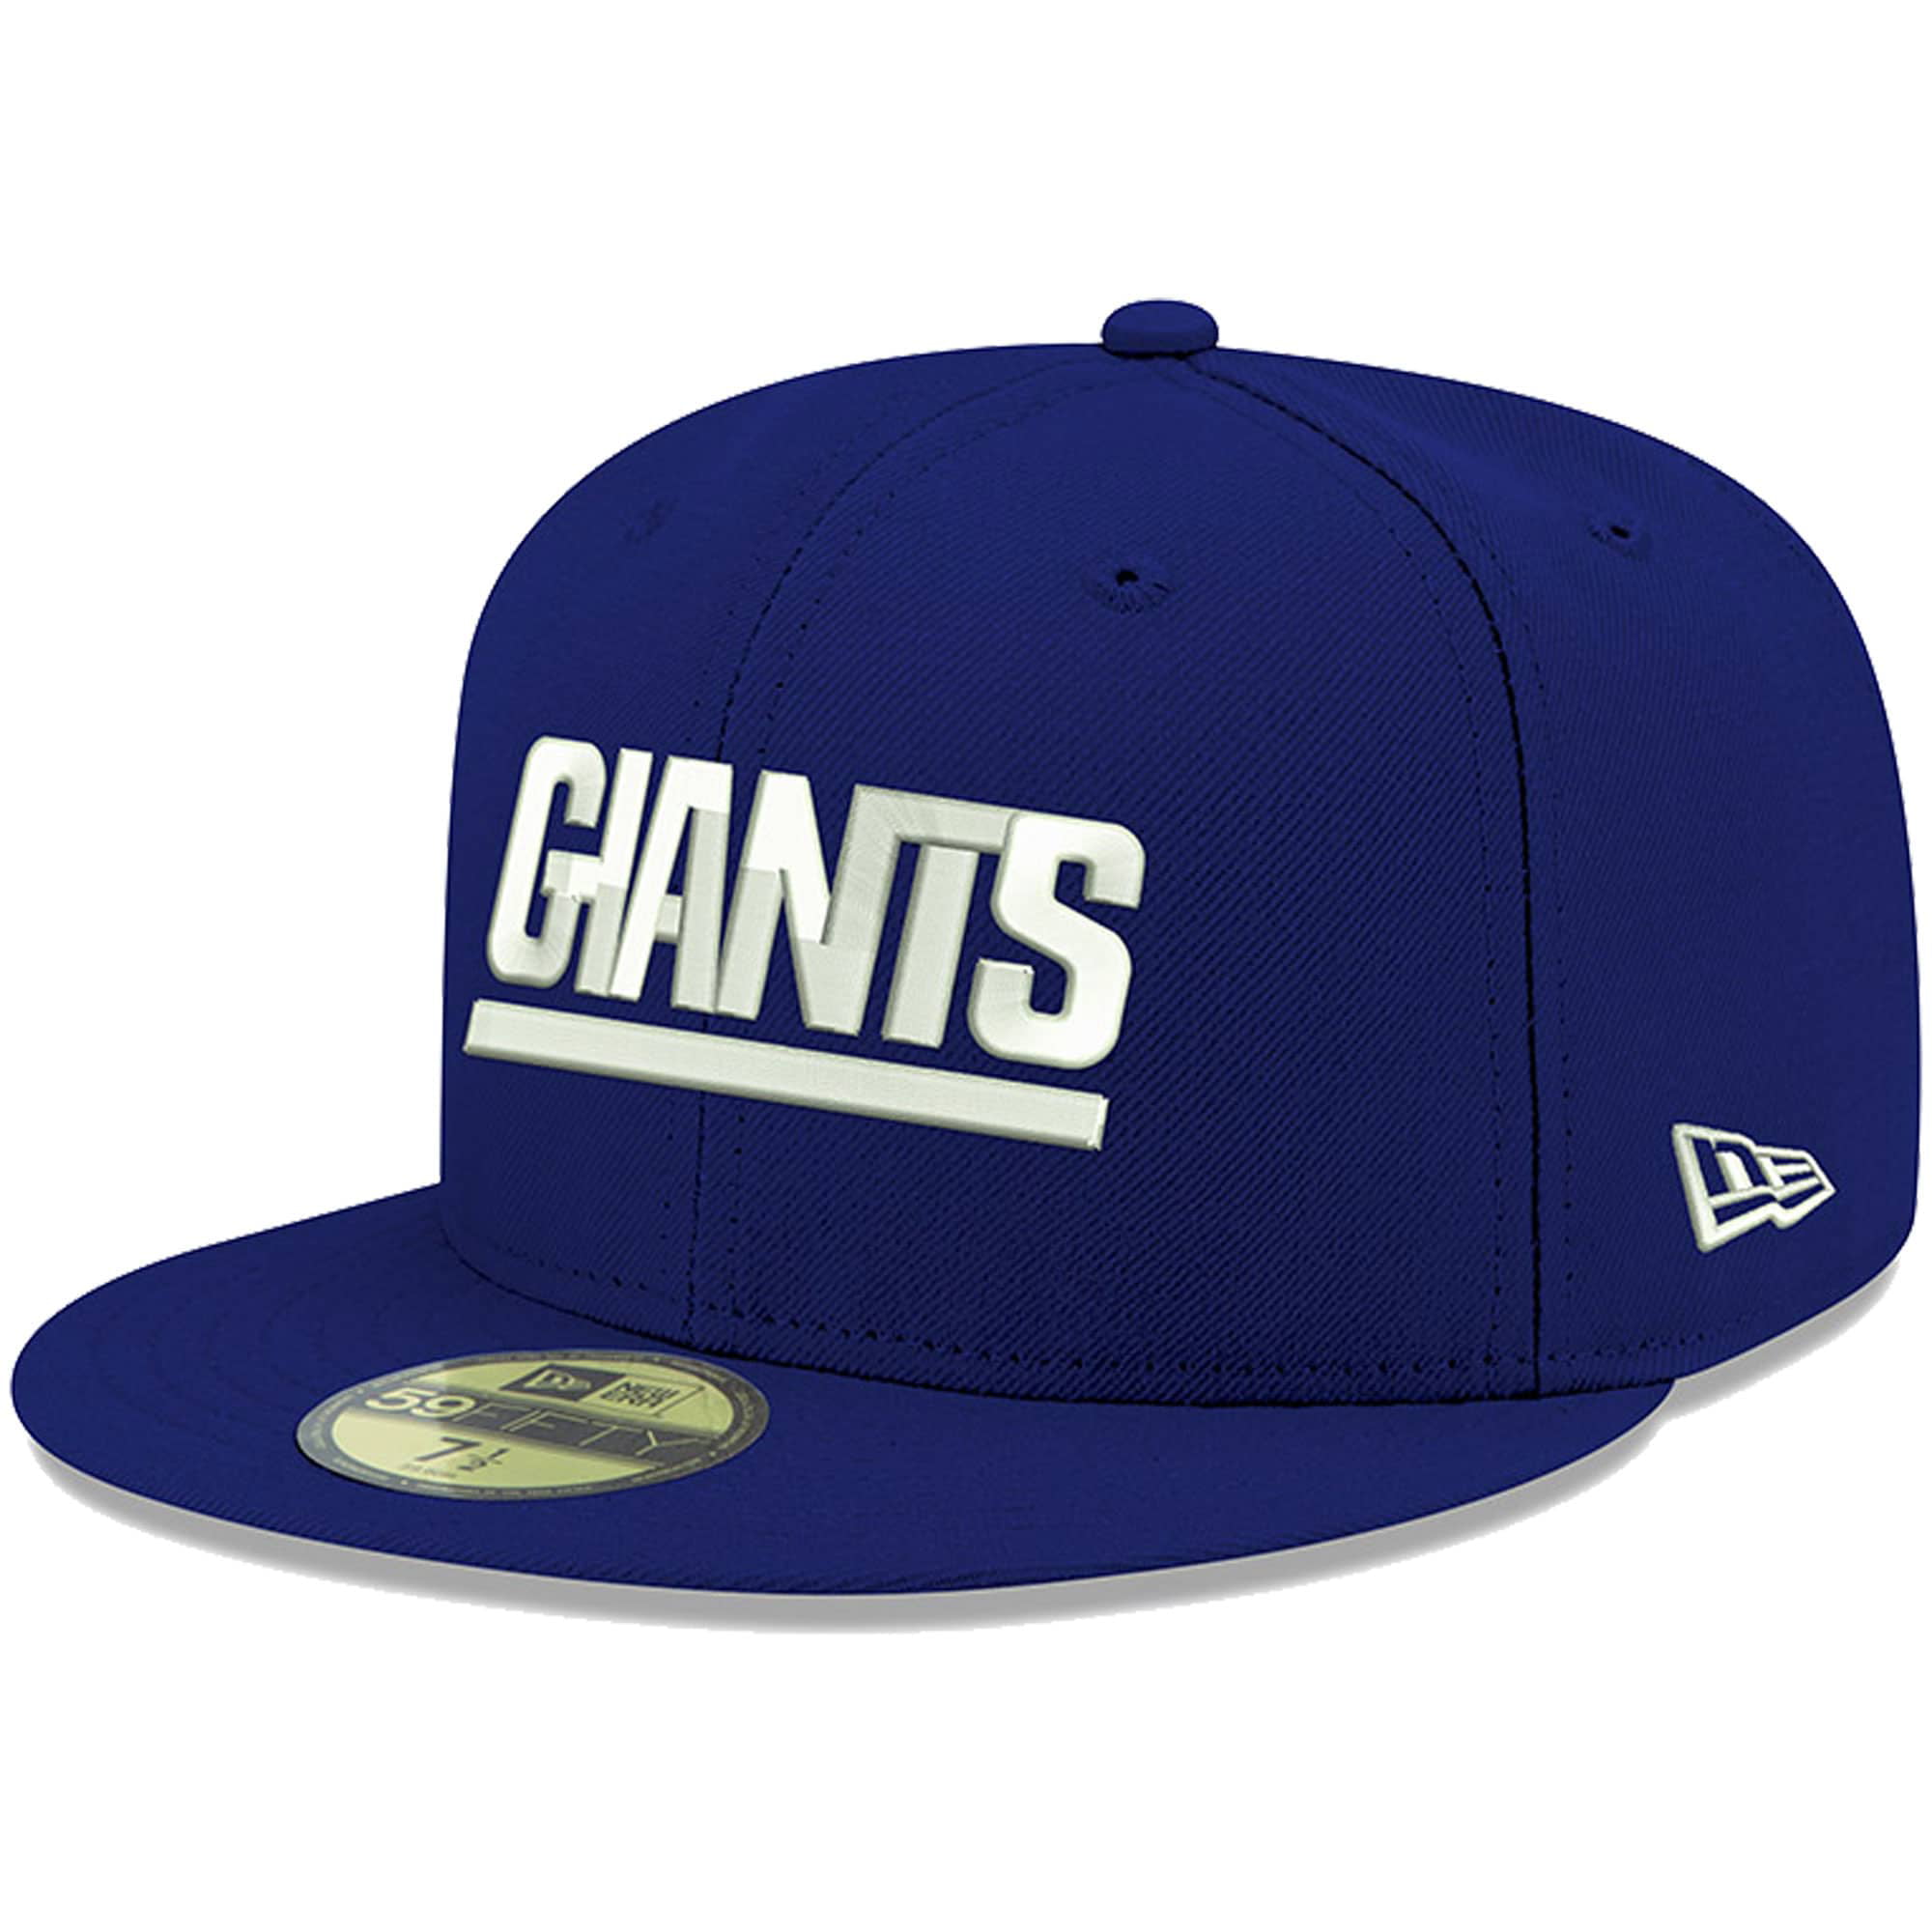 ny giants fitted hats